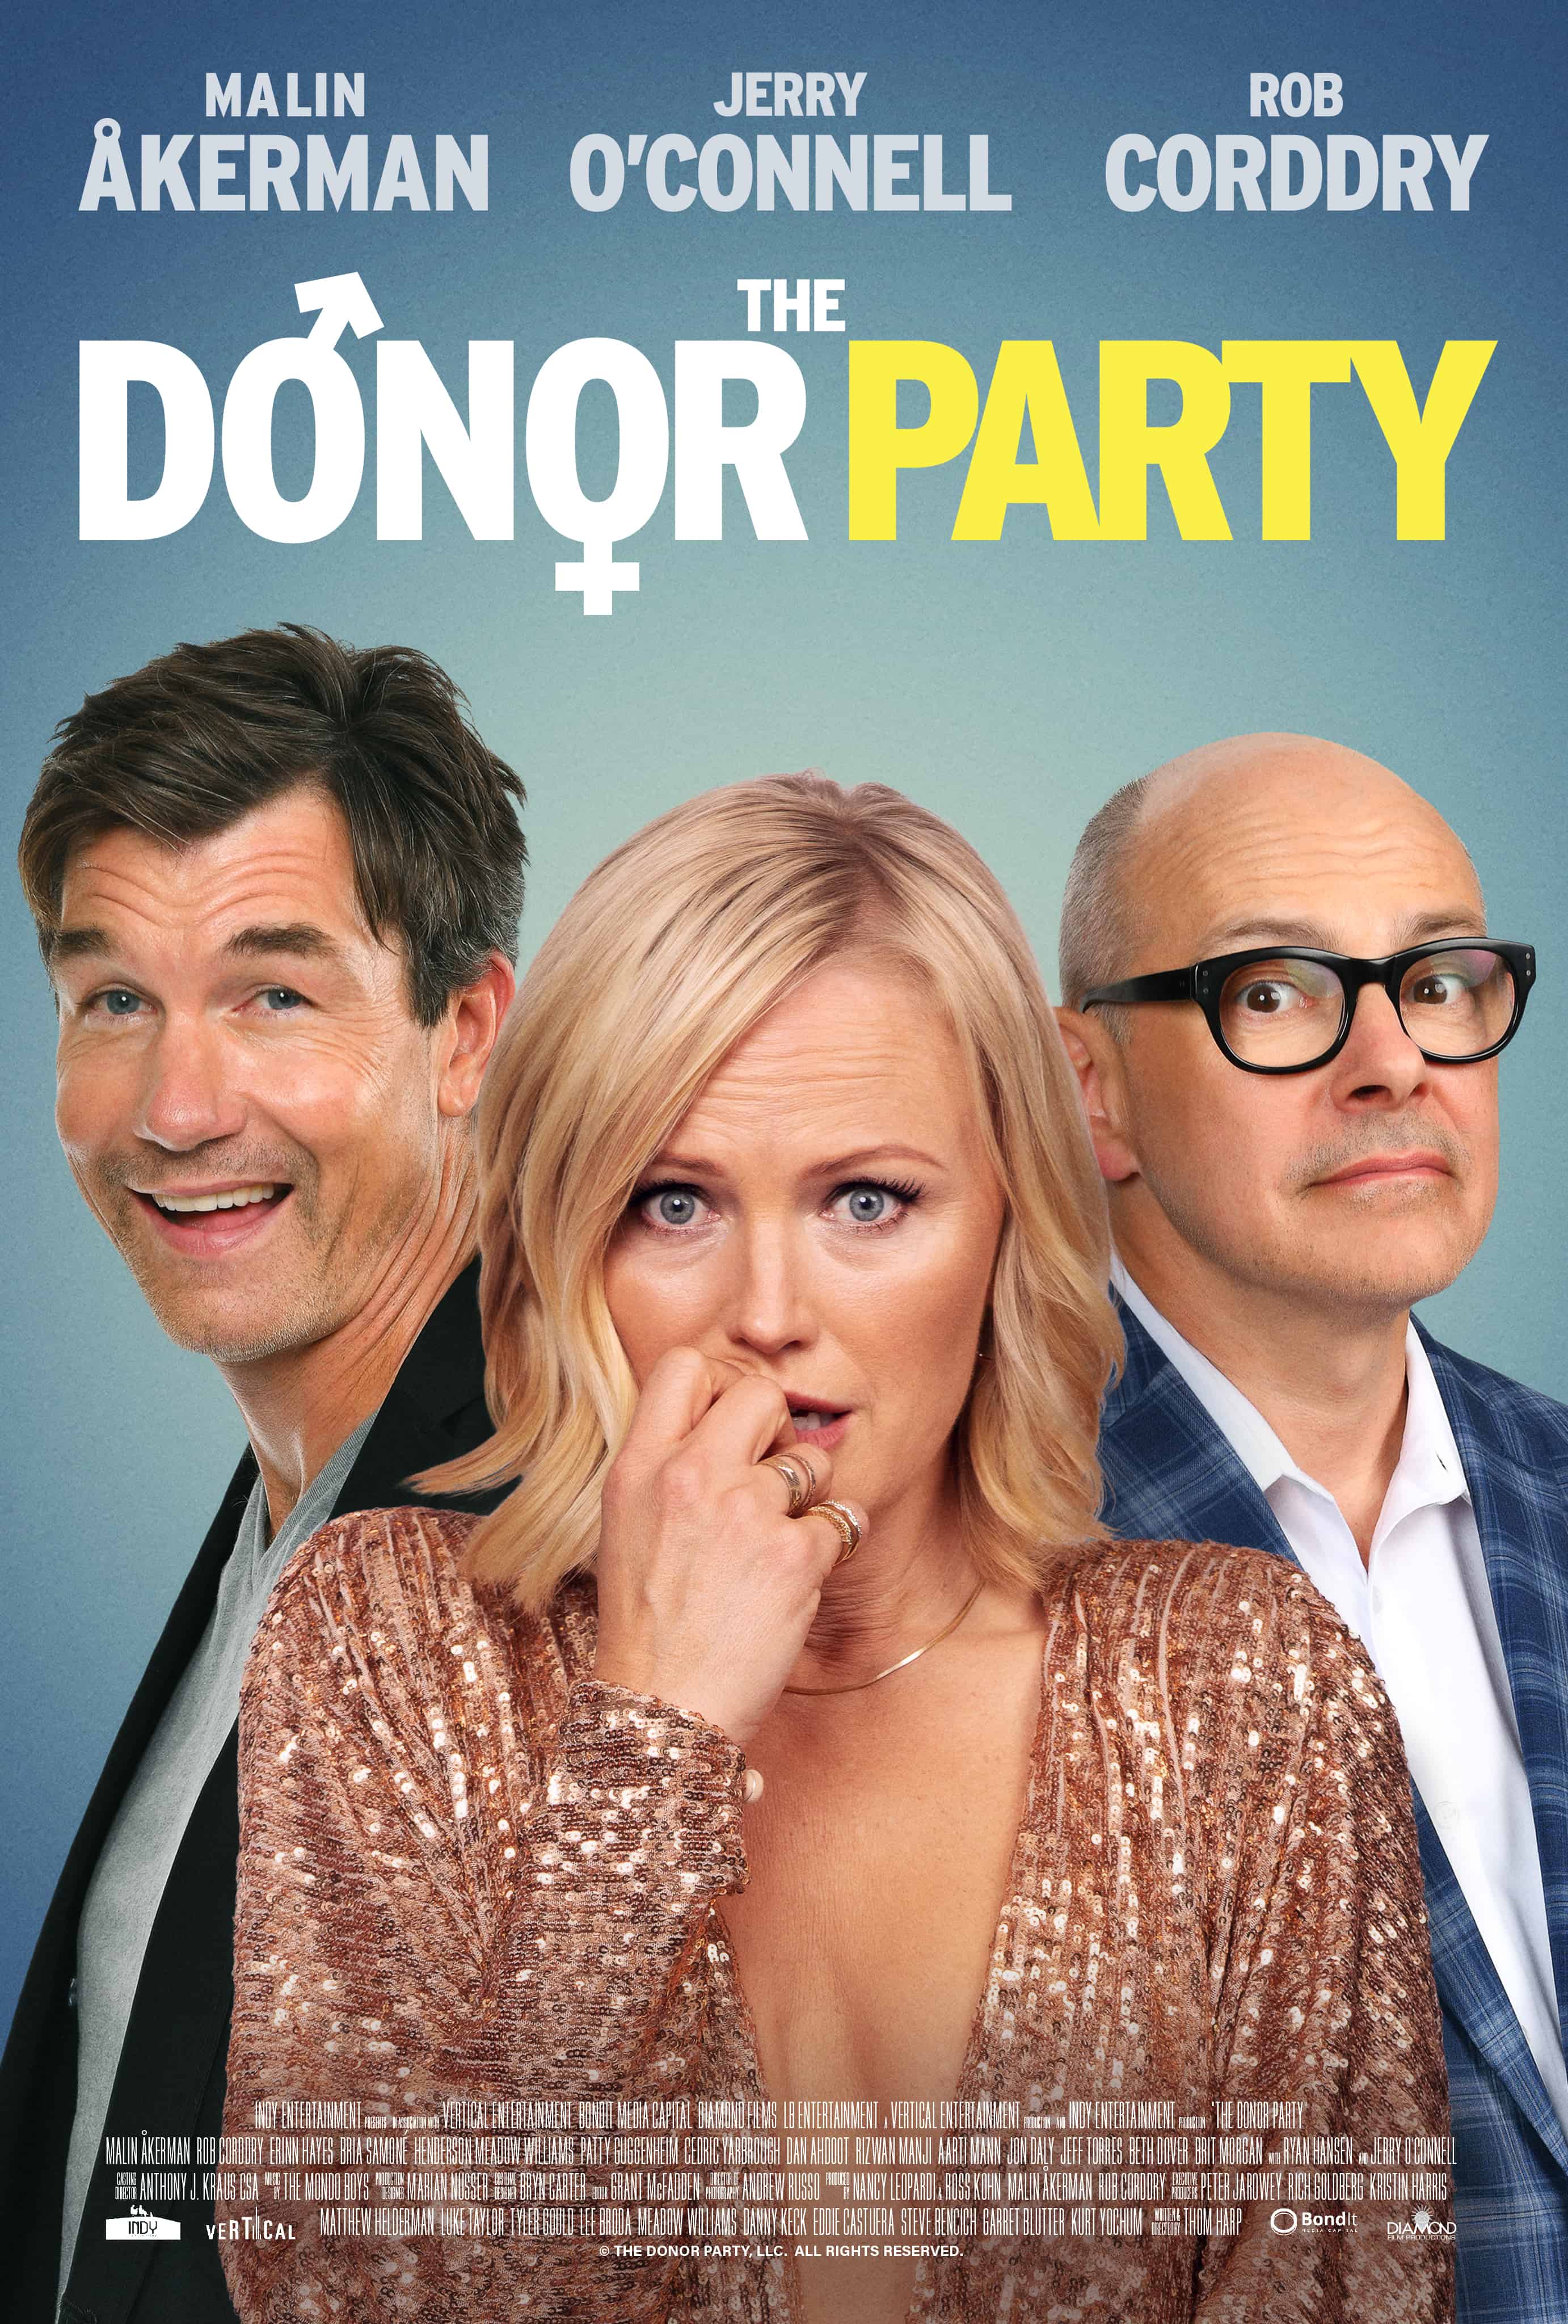 The Donor Party has a new clip! 25